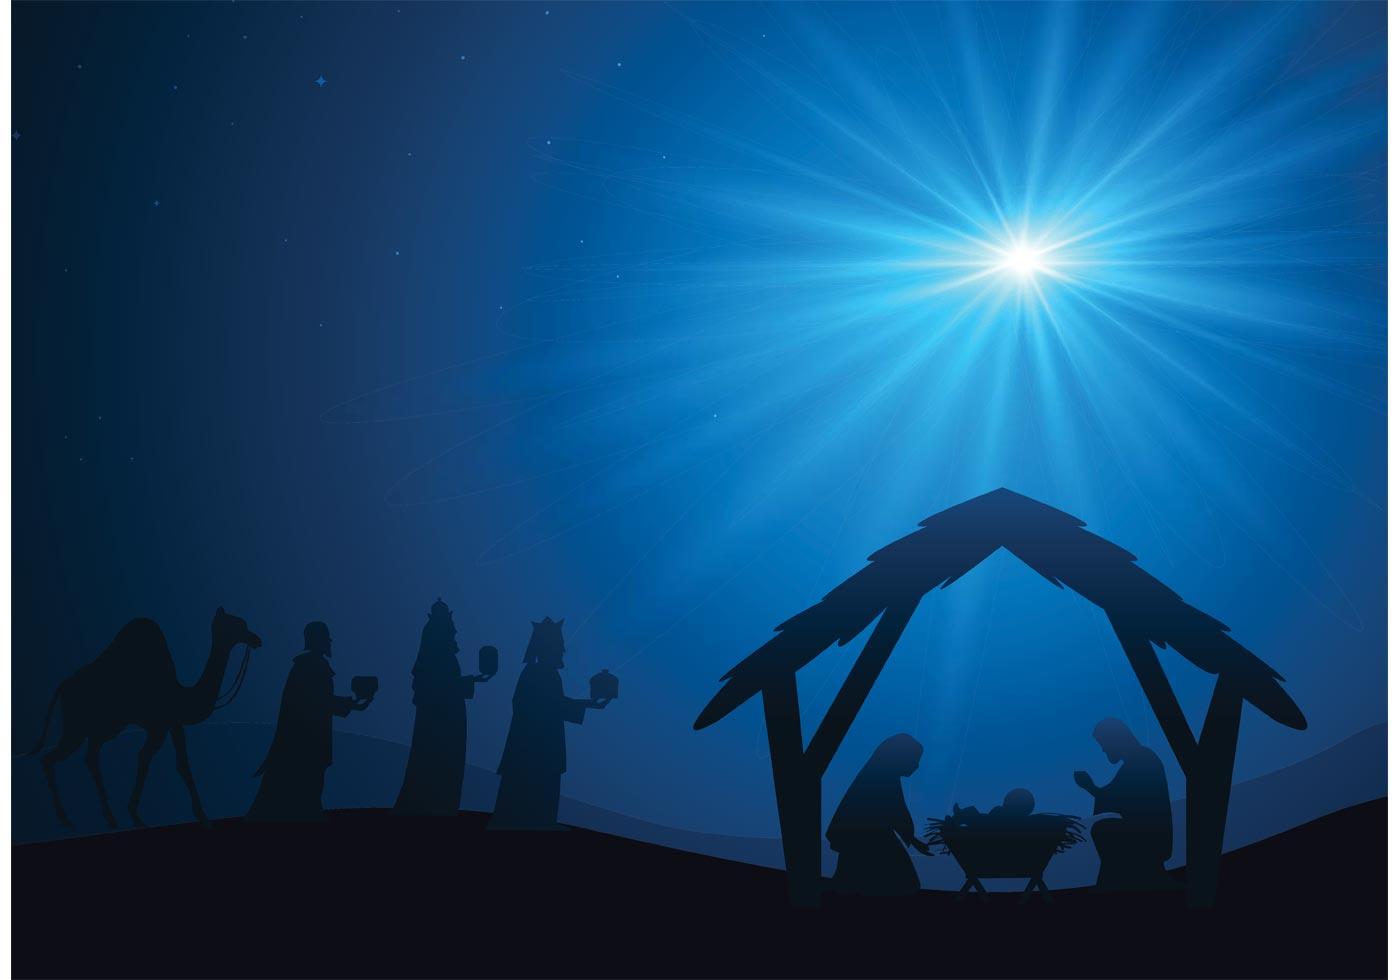 Download Christian Christmas Nativity Wallpapers - Top Free ...